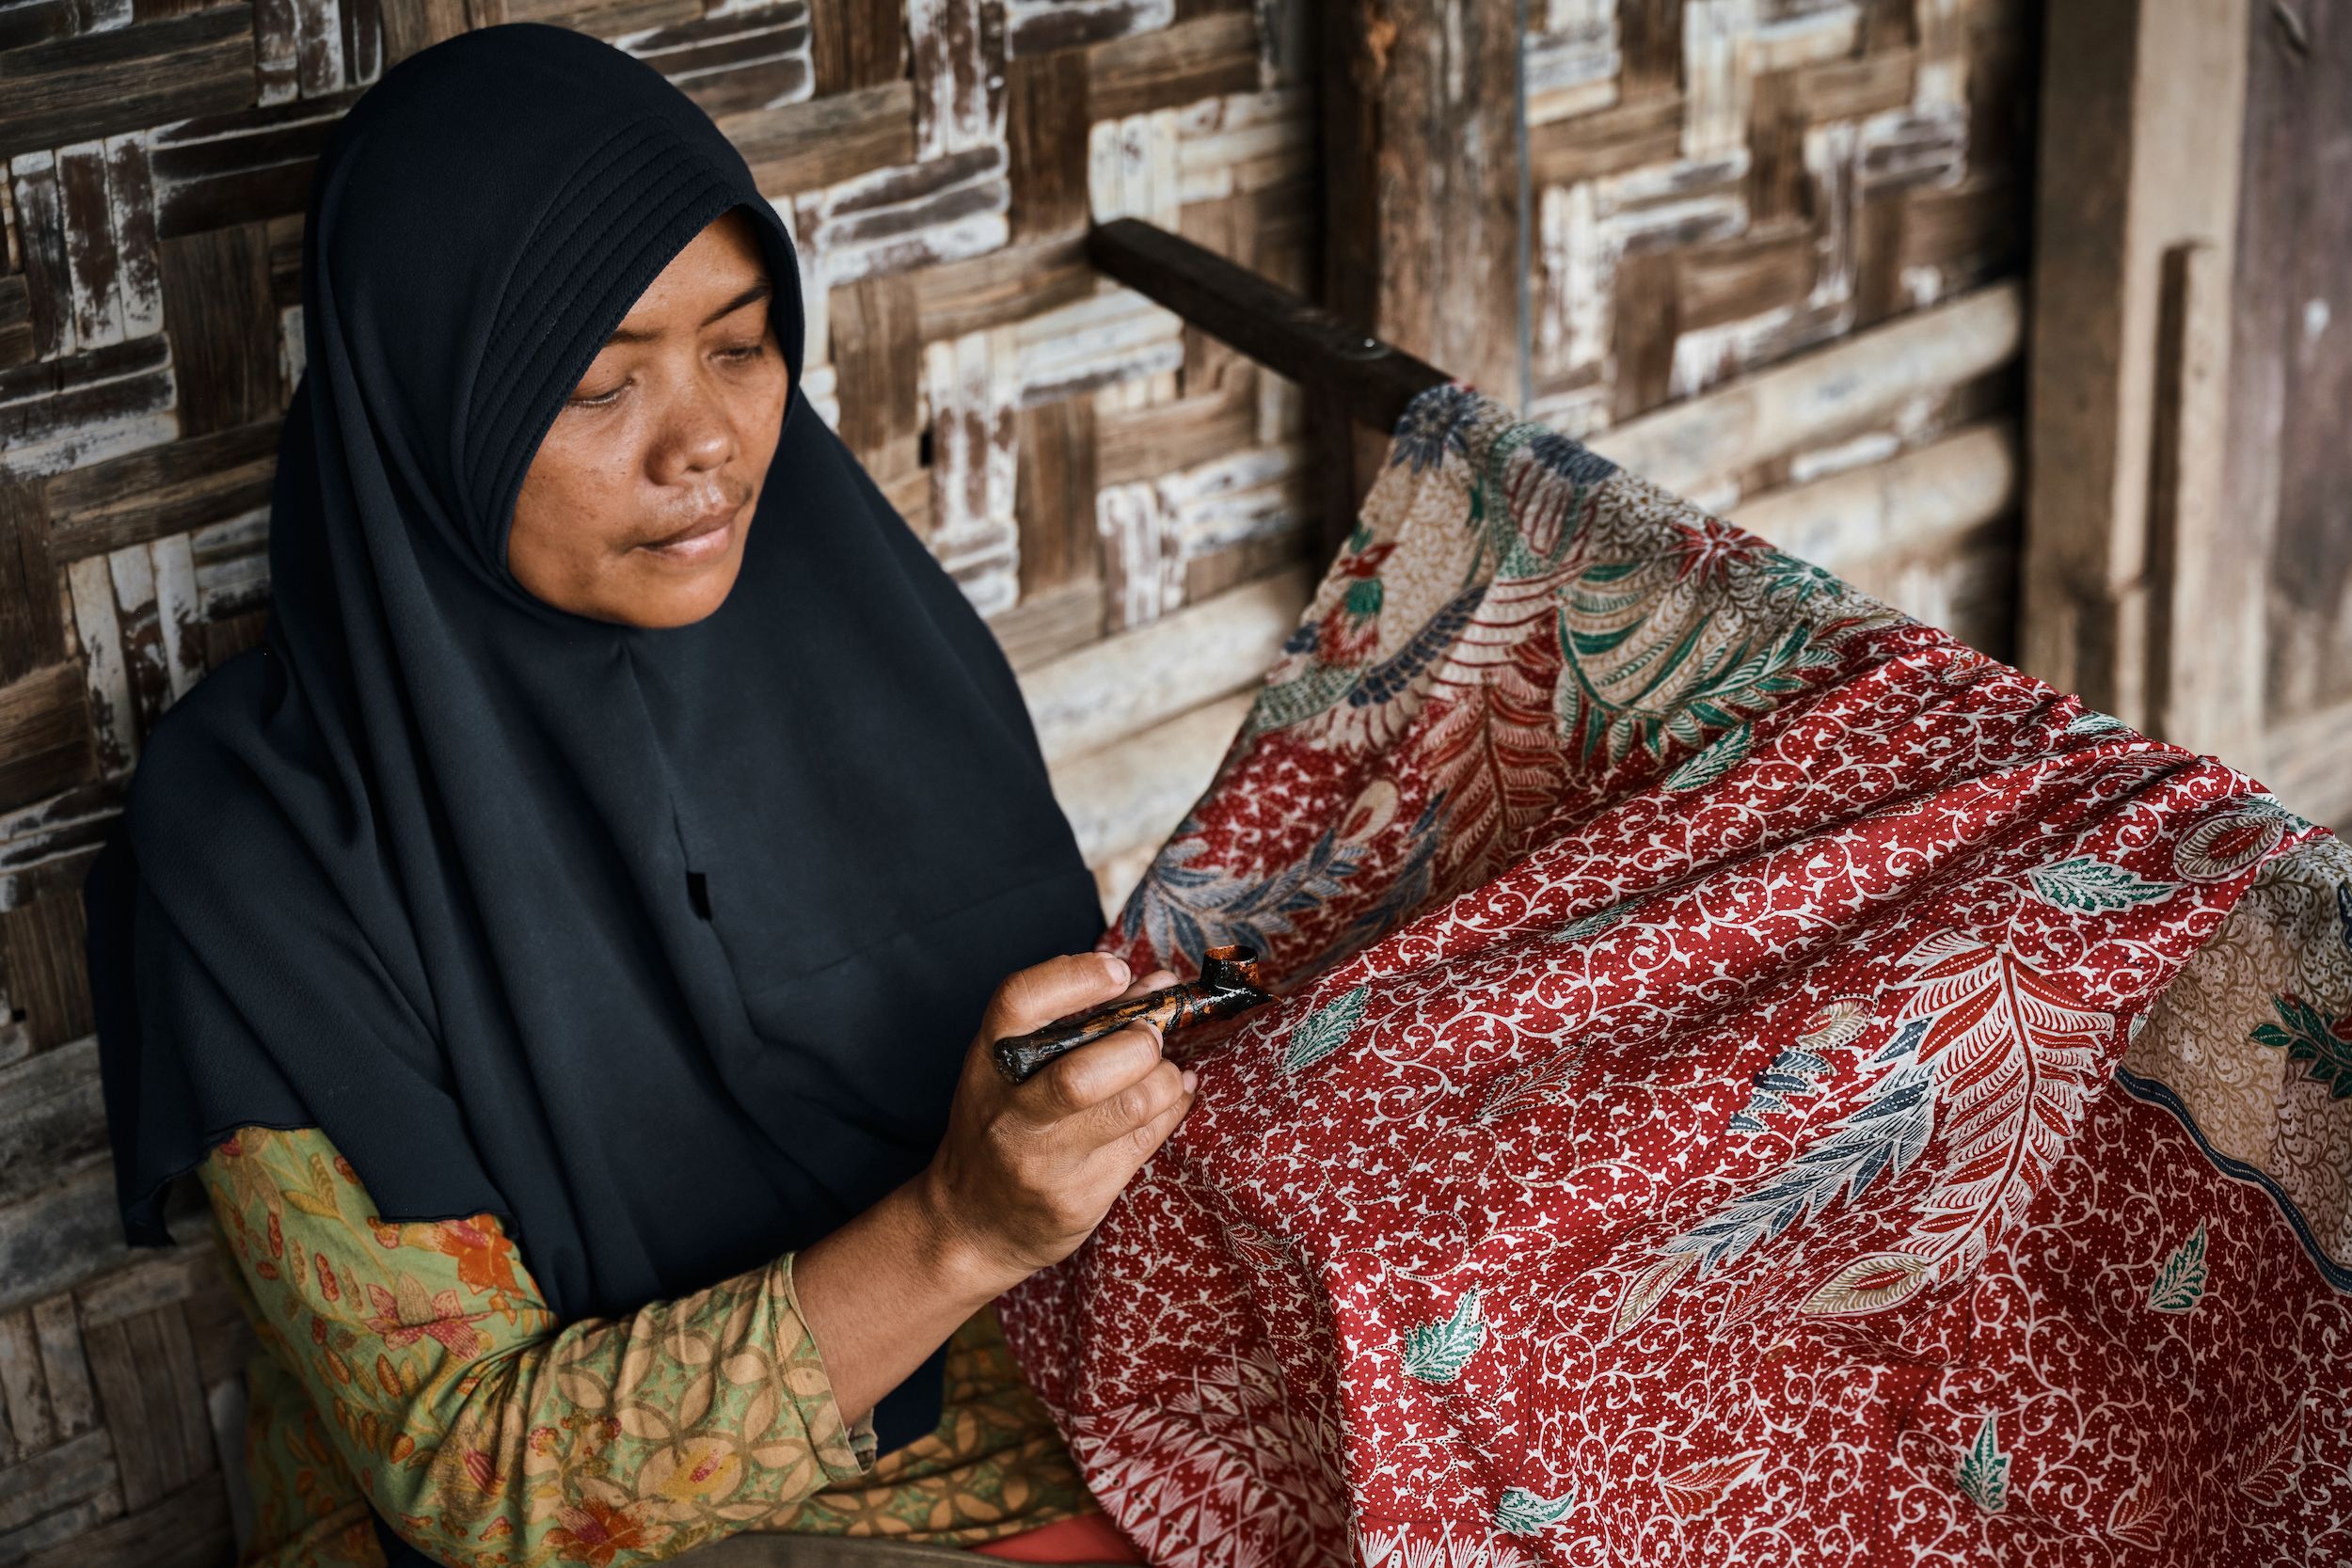 Indonesian woman creating an elaborate Batik design on fabric with red and blue colours.